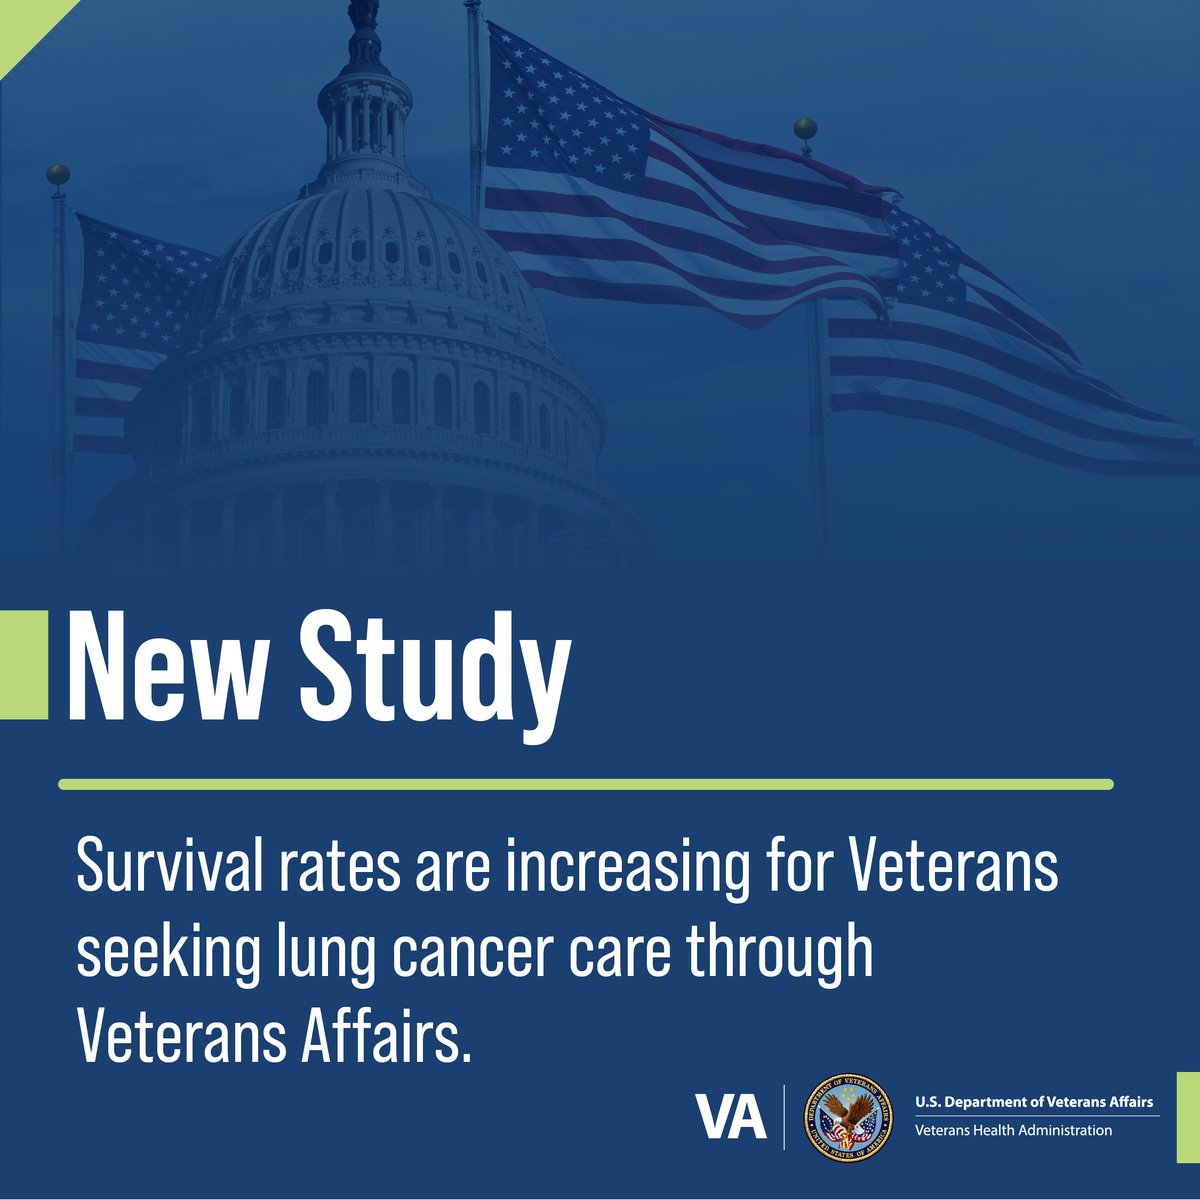 A new study has found that from 2010 to 2017, during which time VA launched its National Oncology Program, lung cancer survival rates among Veterans have drastically increased.
clinical-lung-cancer.com/article/S1525-… #Veterans #CancerCare #Cancer #VeteranHealth #CancerScreening